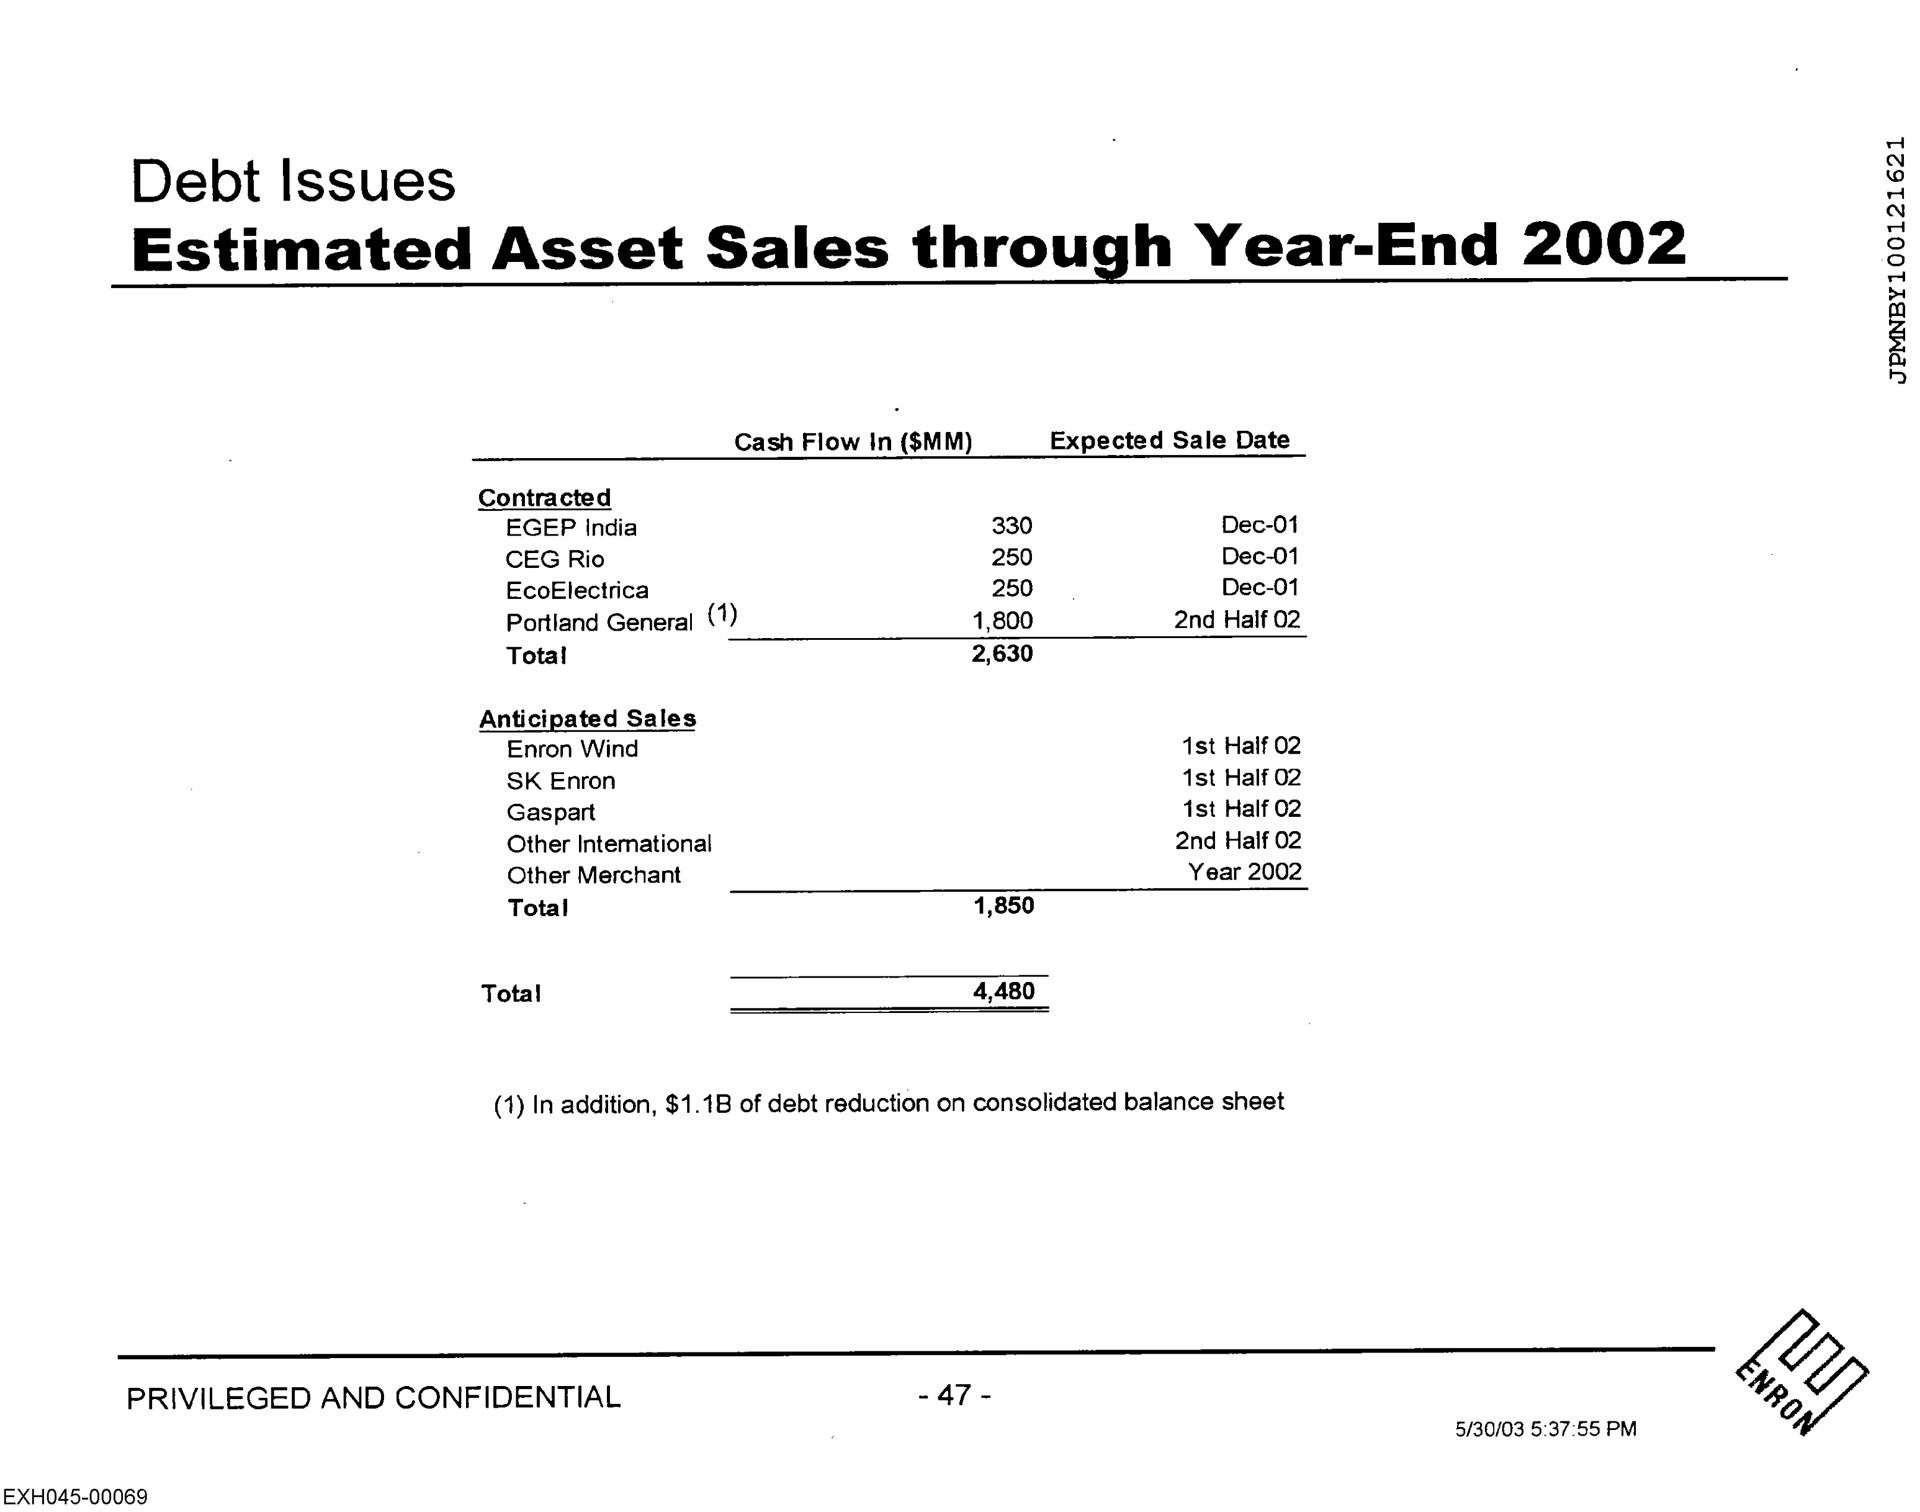 debt issues estimated asset sales through year end | Enron